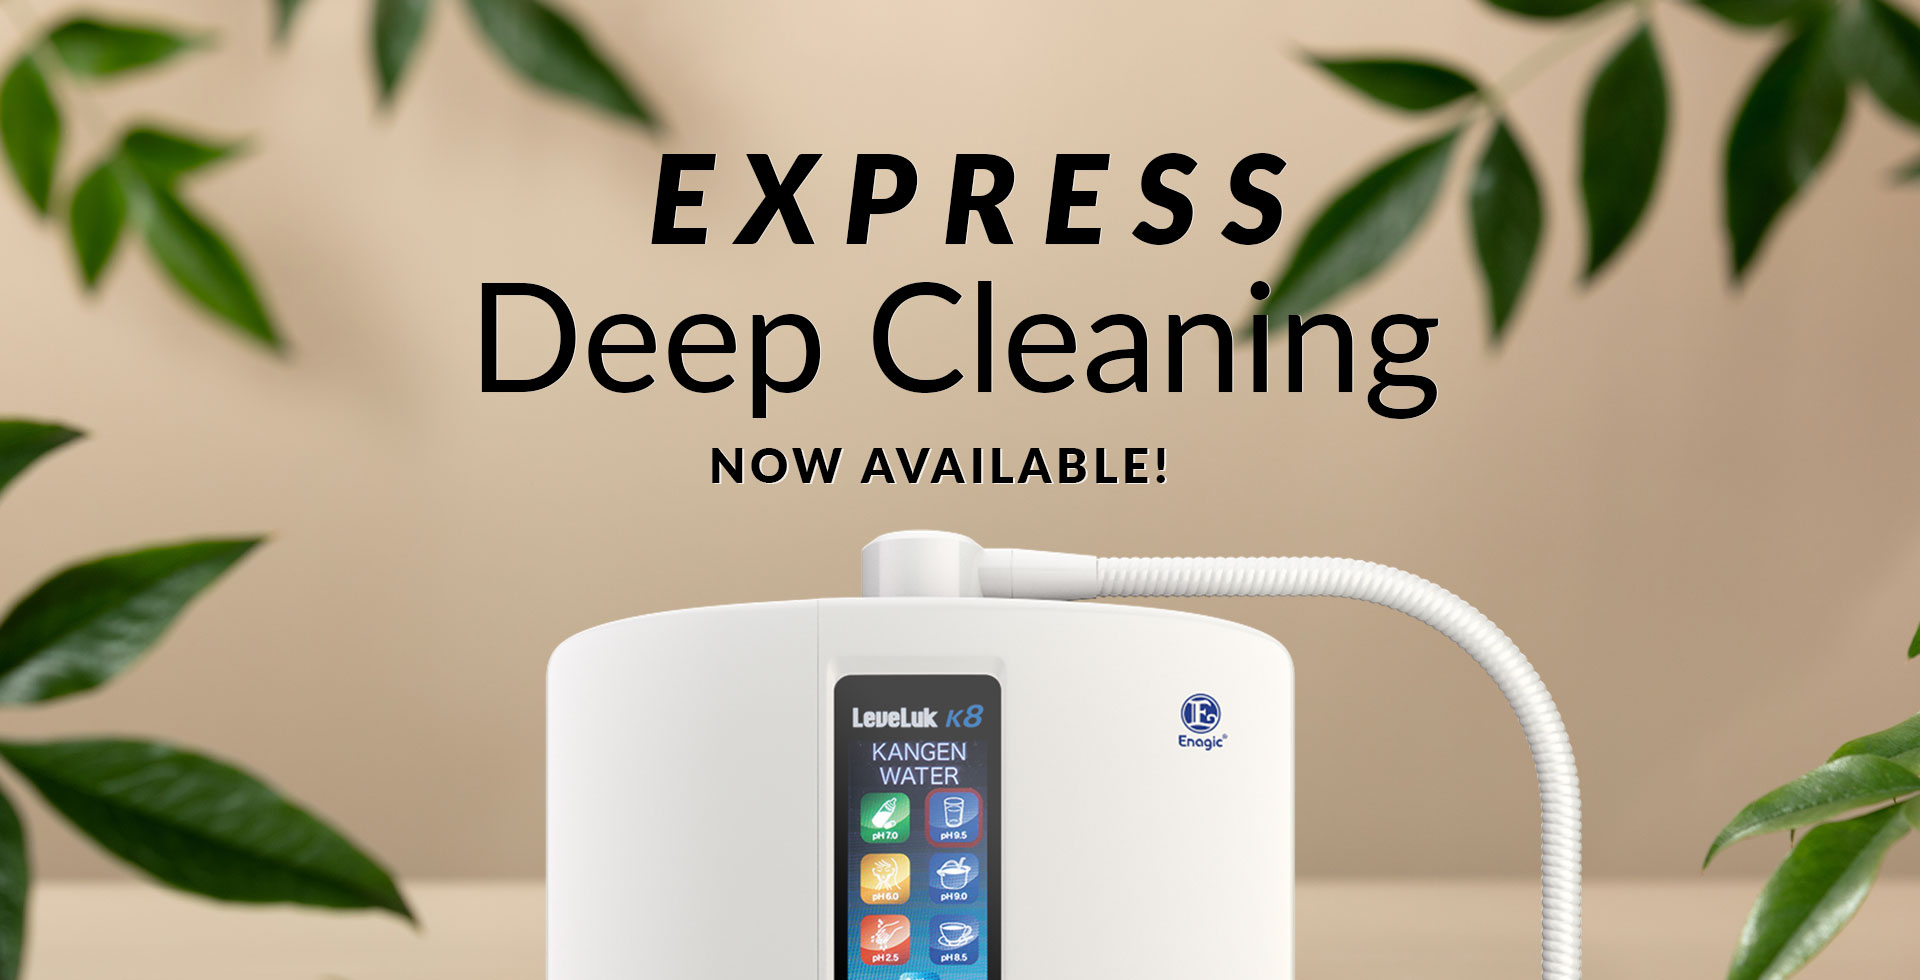 Express Deep Cleaning Available